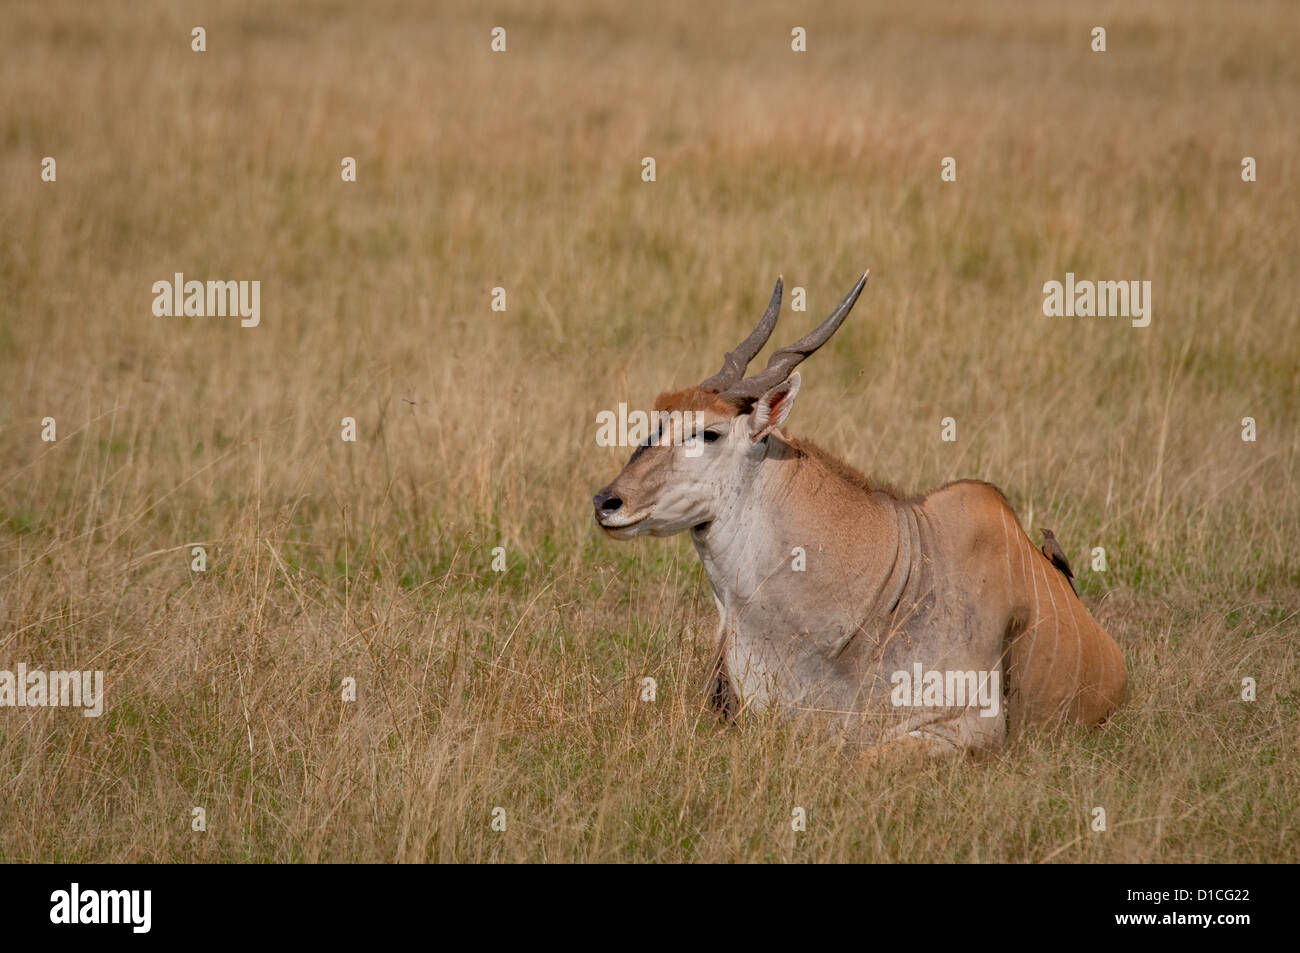 Eland lying down in plains Stock Photo